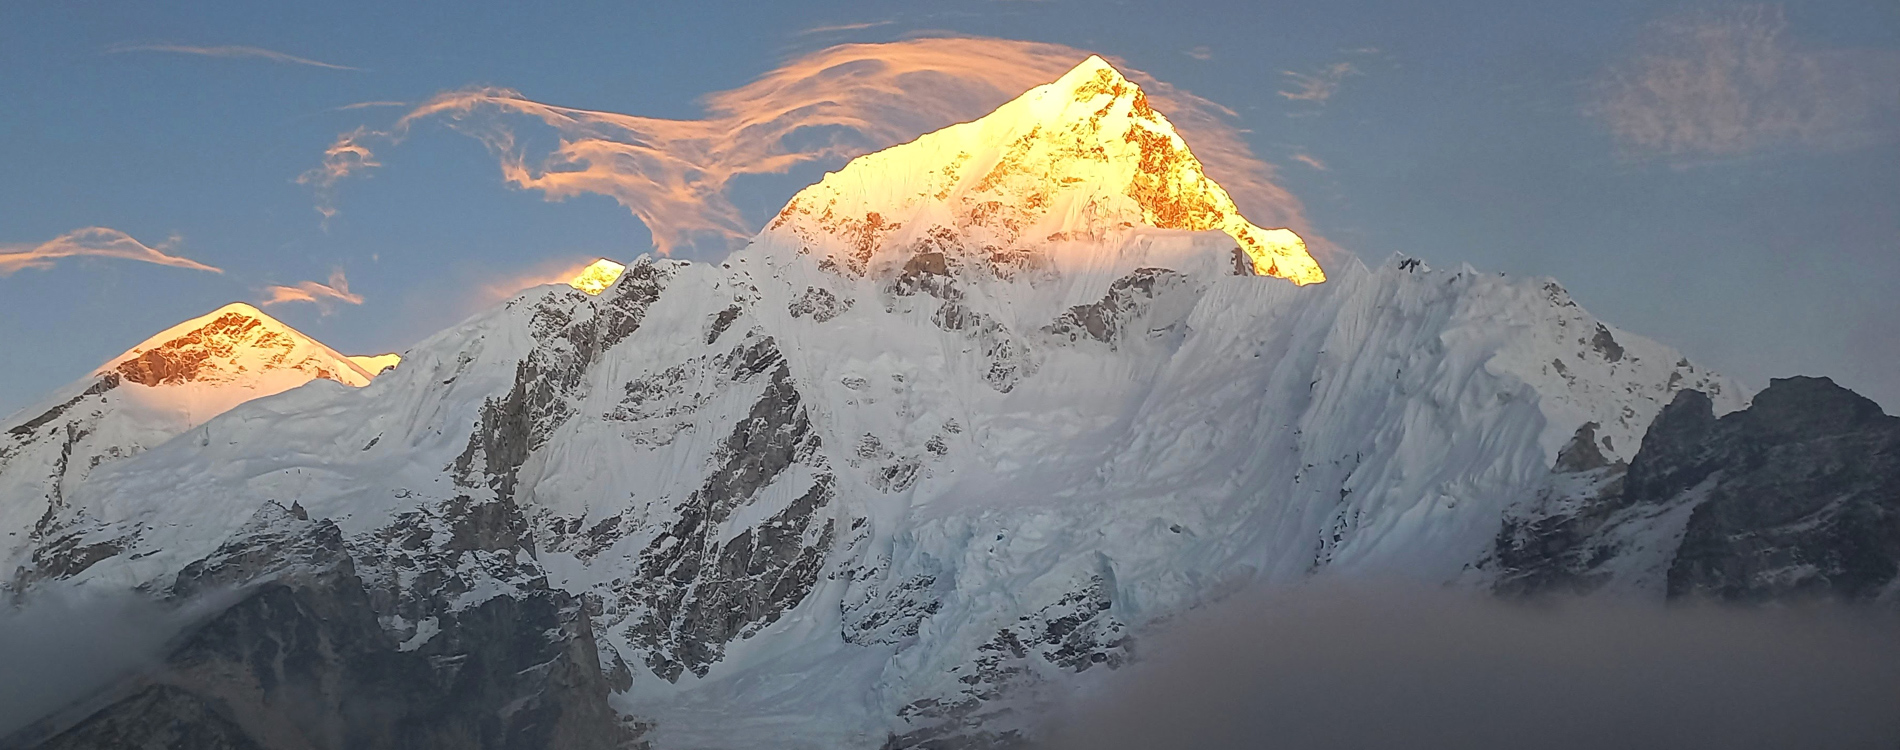 ACE the Himalaya - Everest Overview in the Morning (Sunrise at the top of Mt. Everest.)